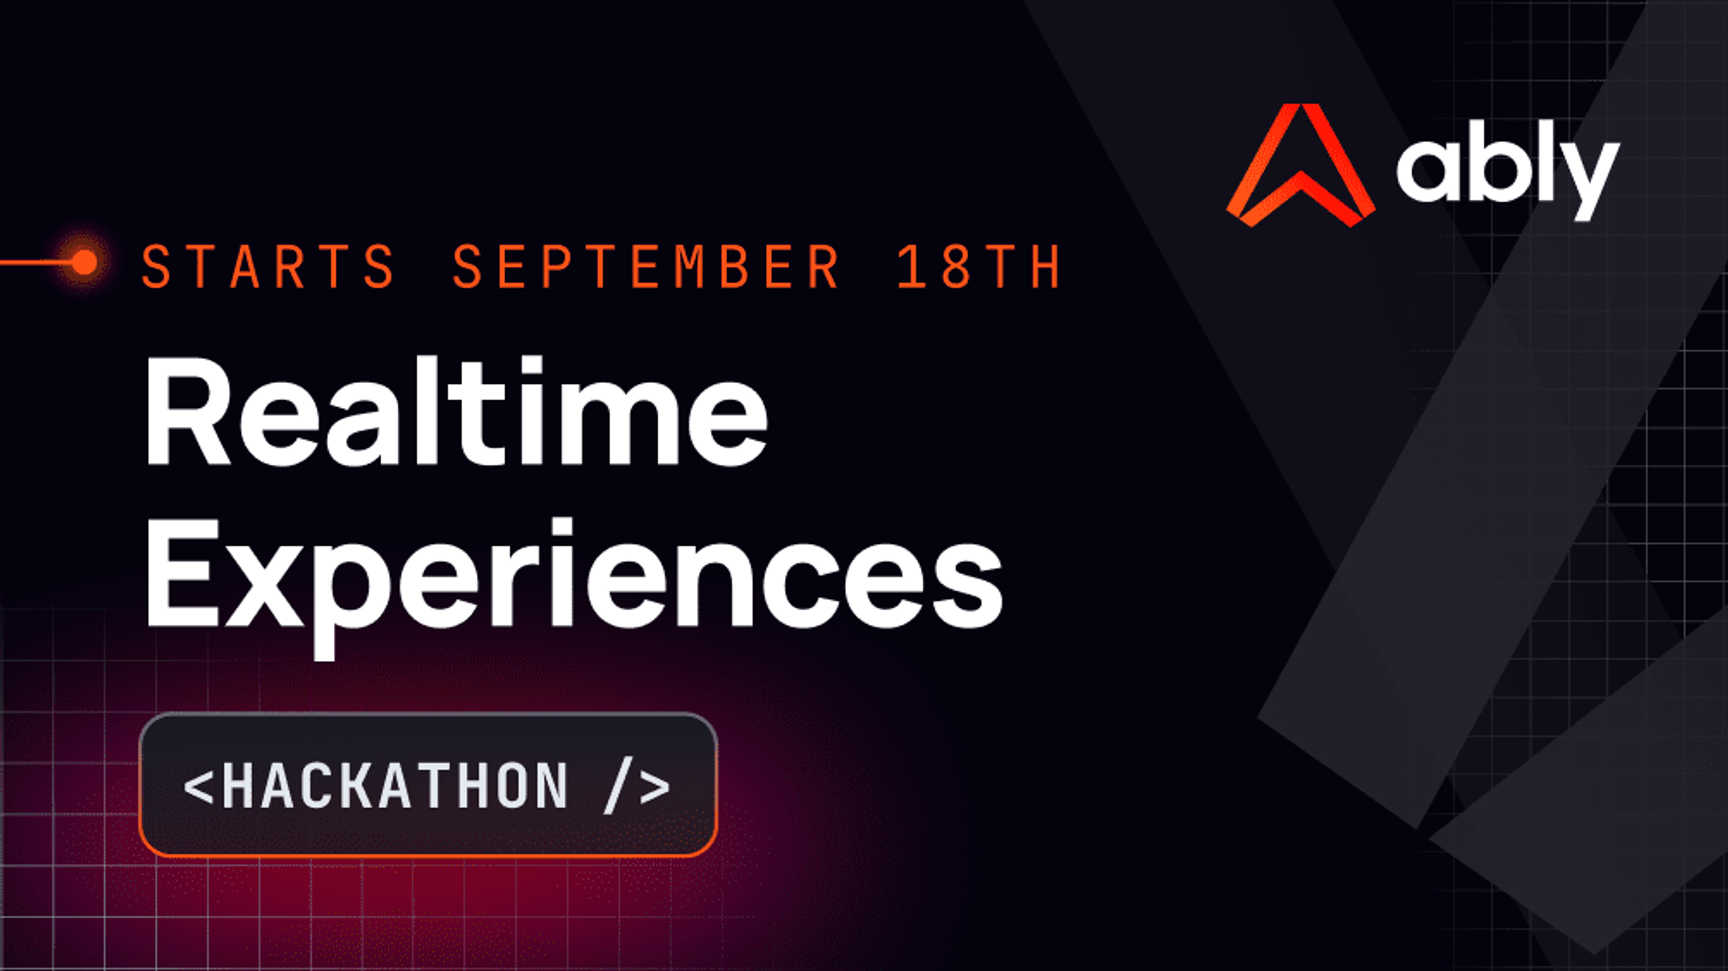 Take part in the Ably Realtime Experiences Hackathon